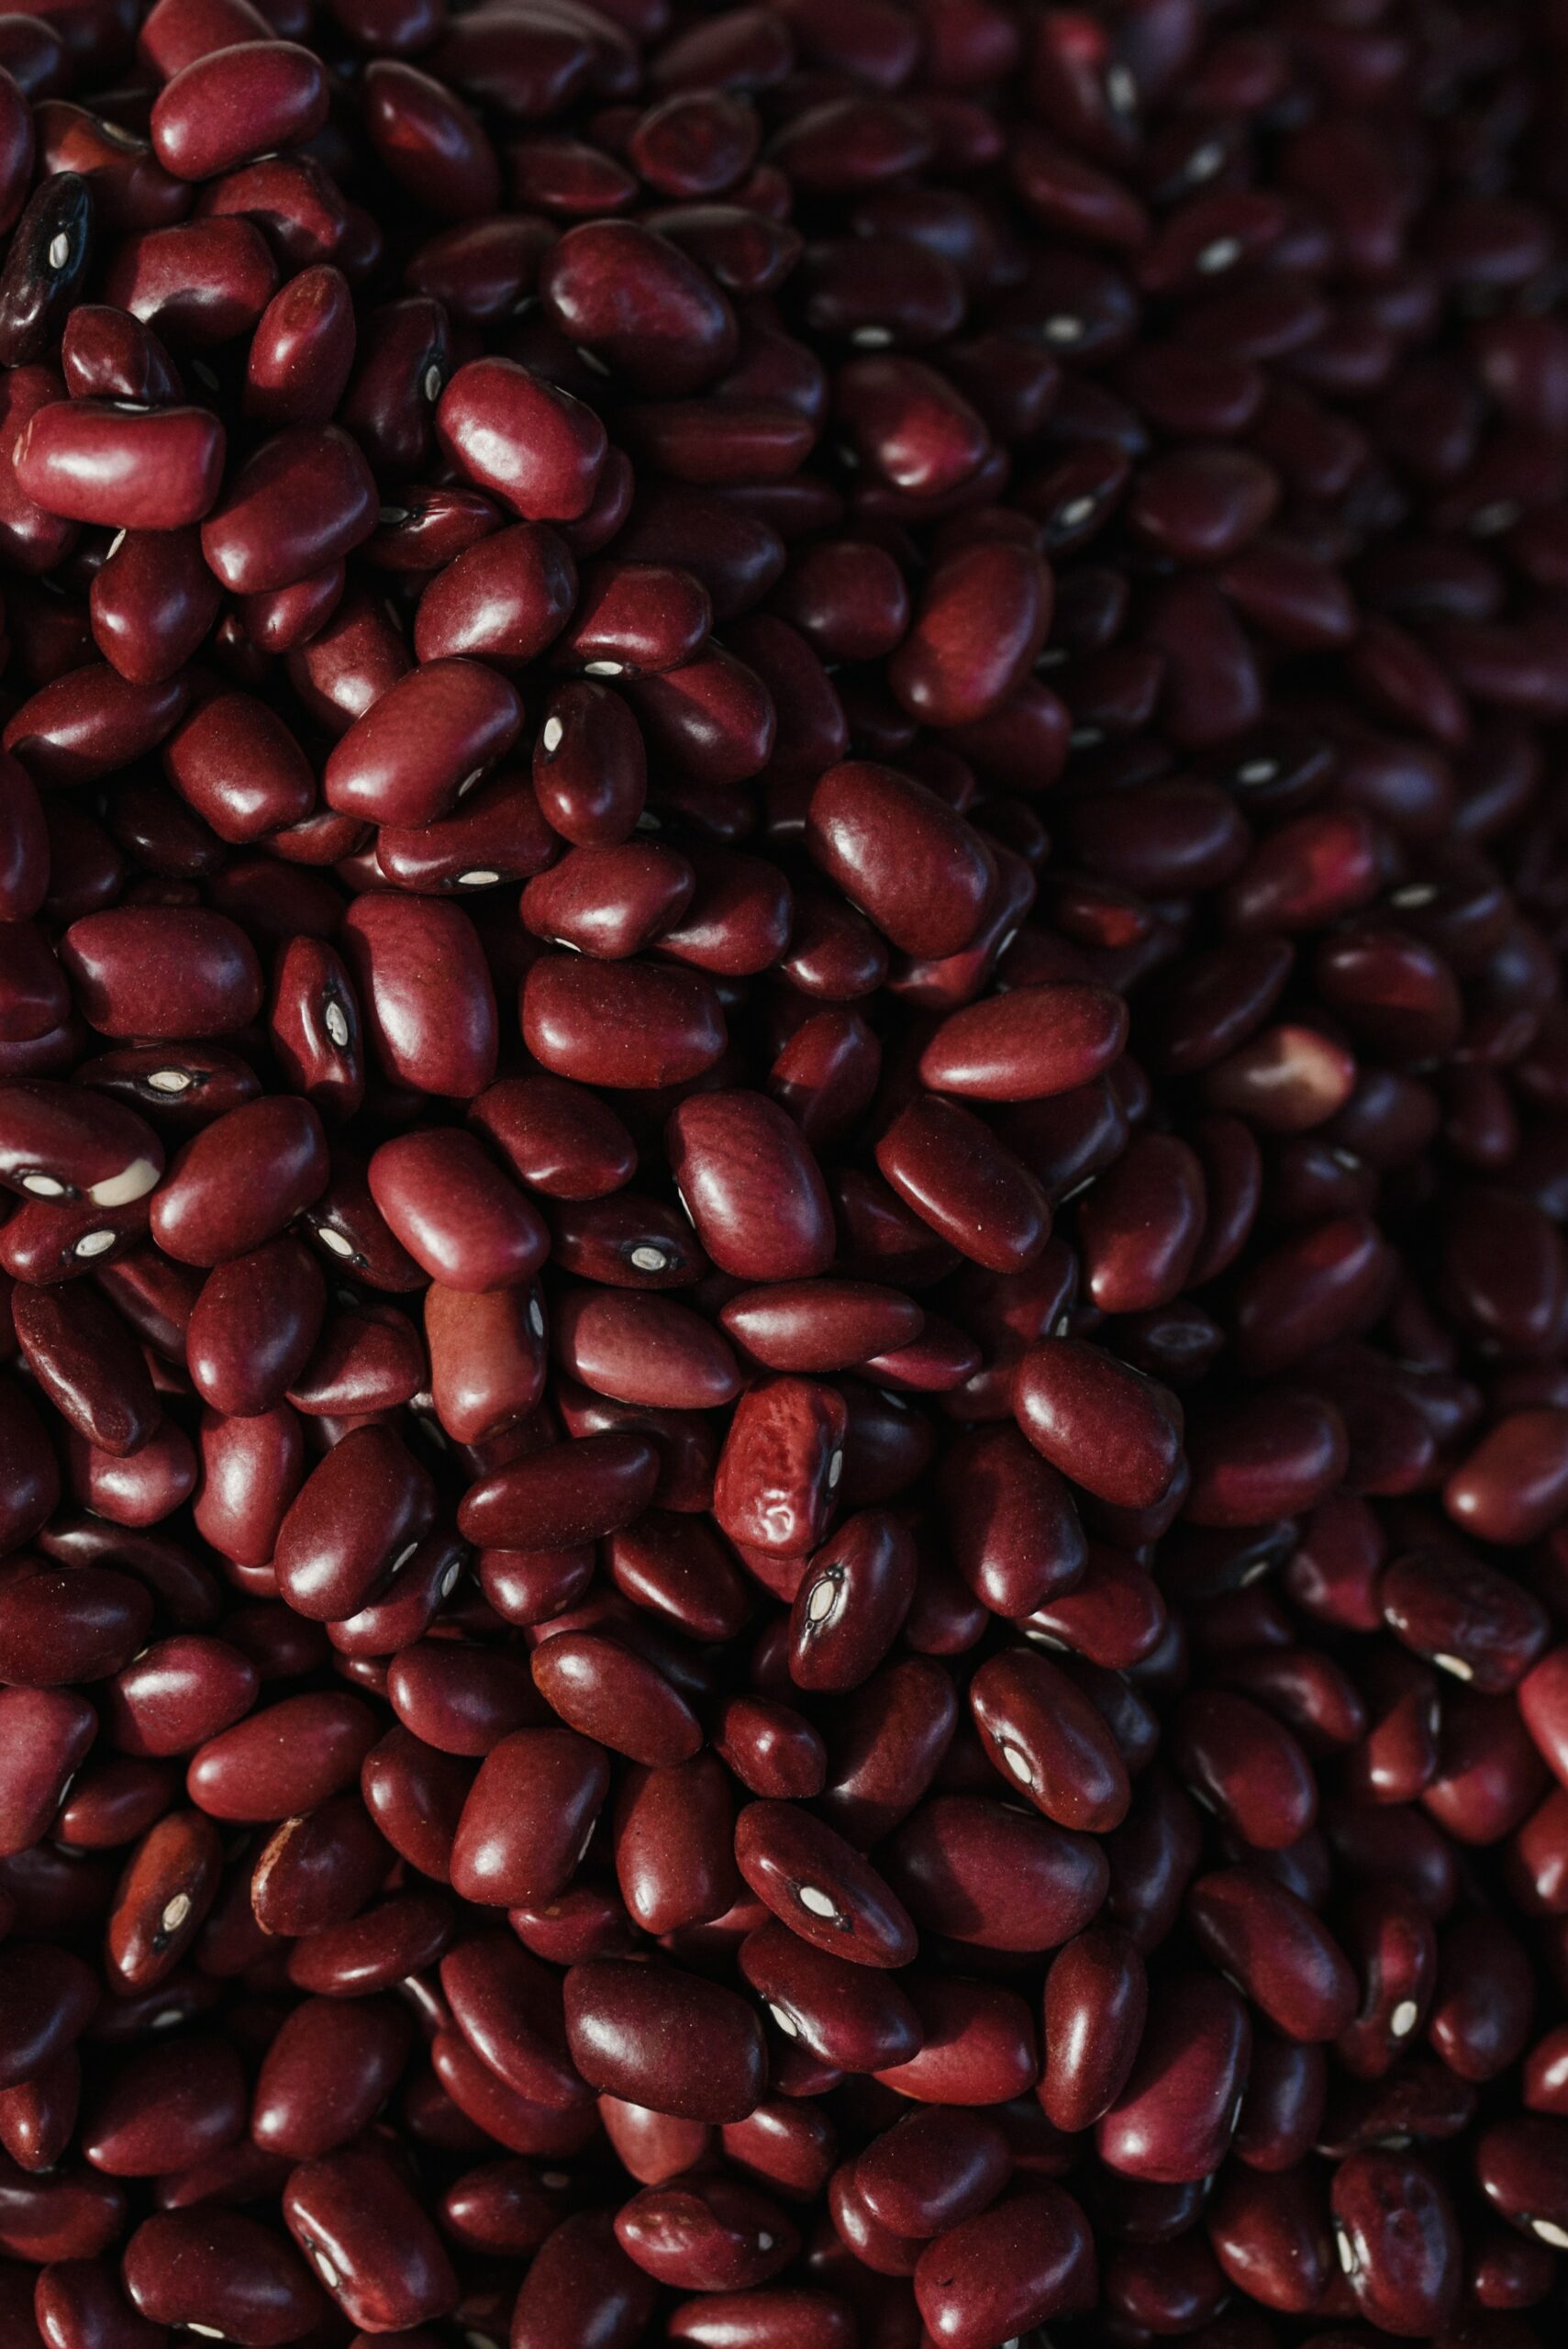 A close up of dried kidney beans.